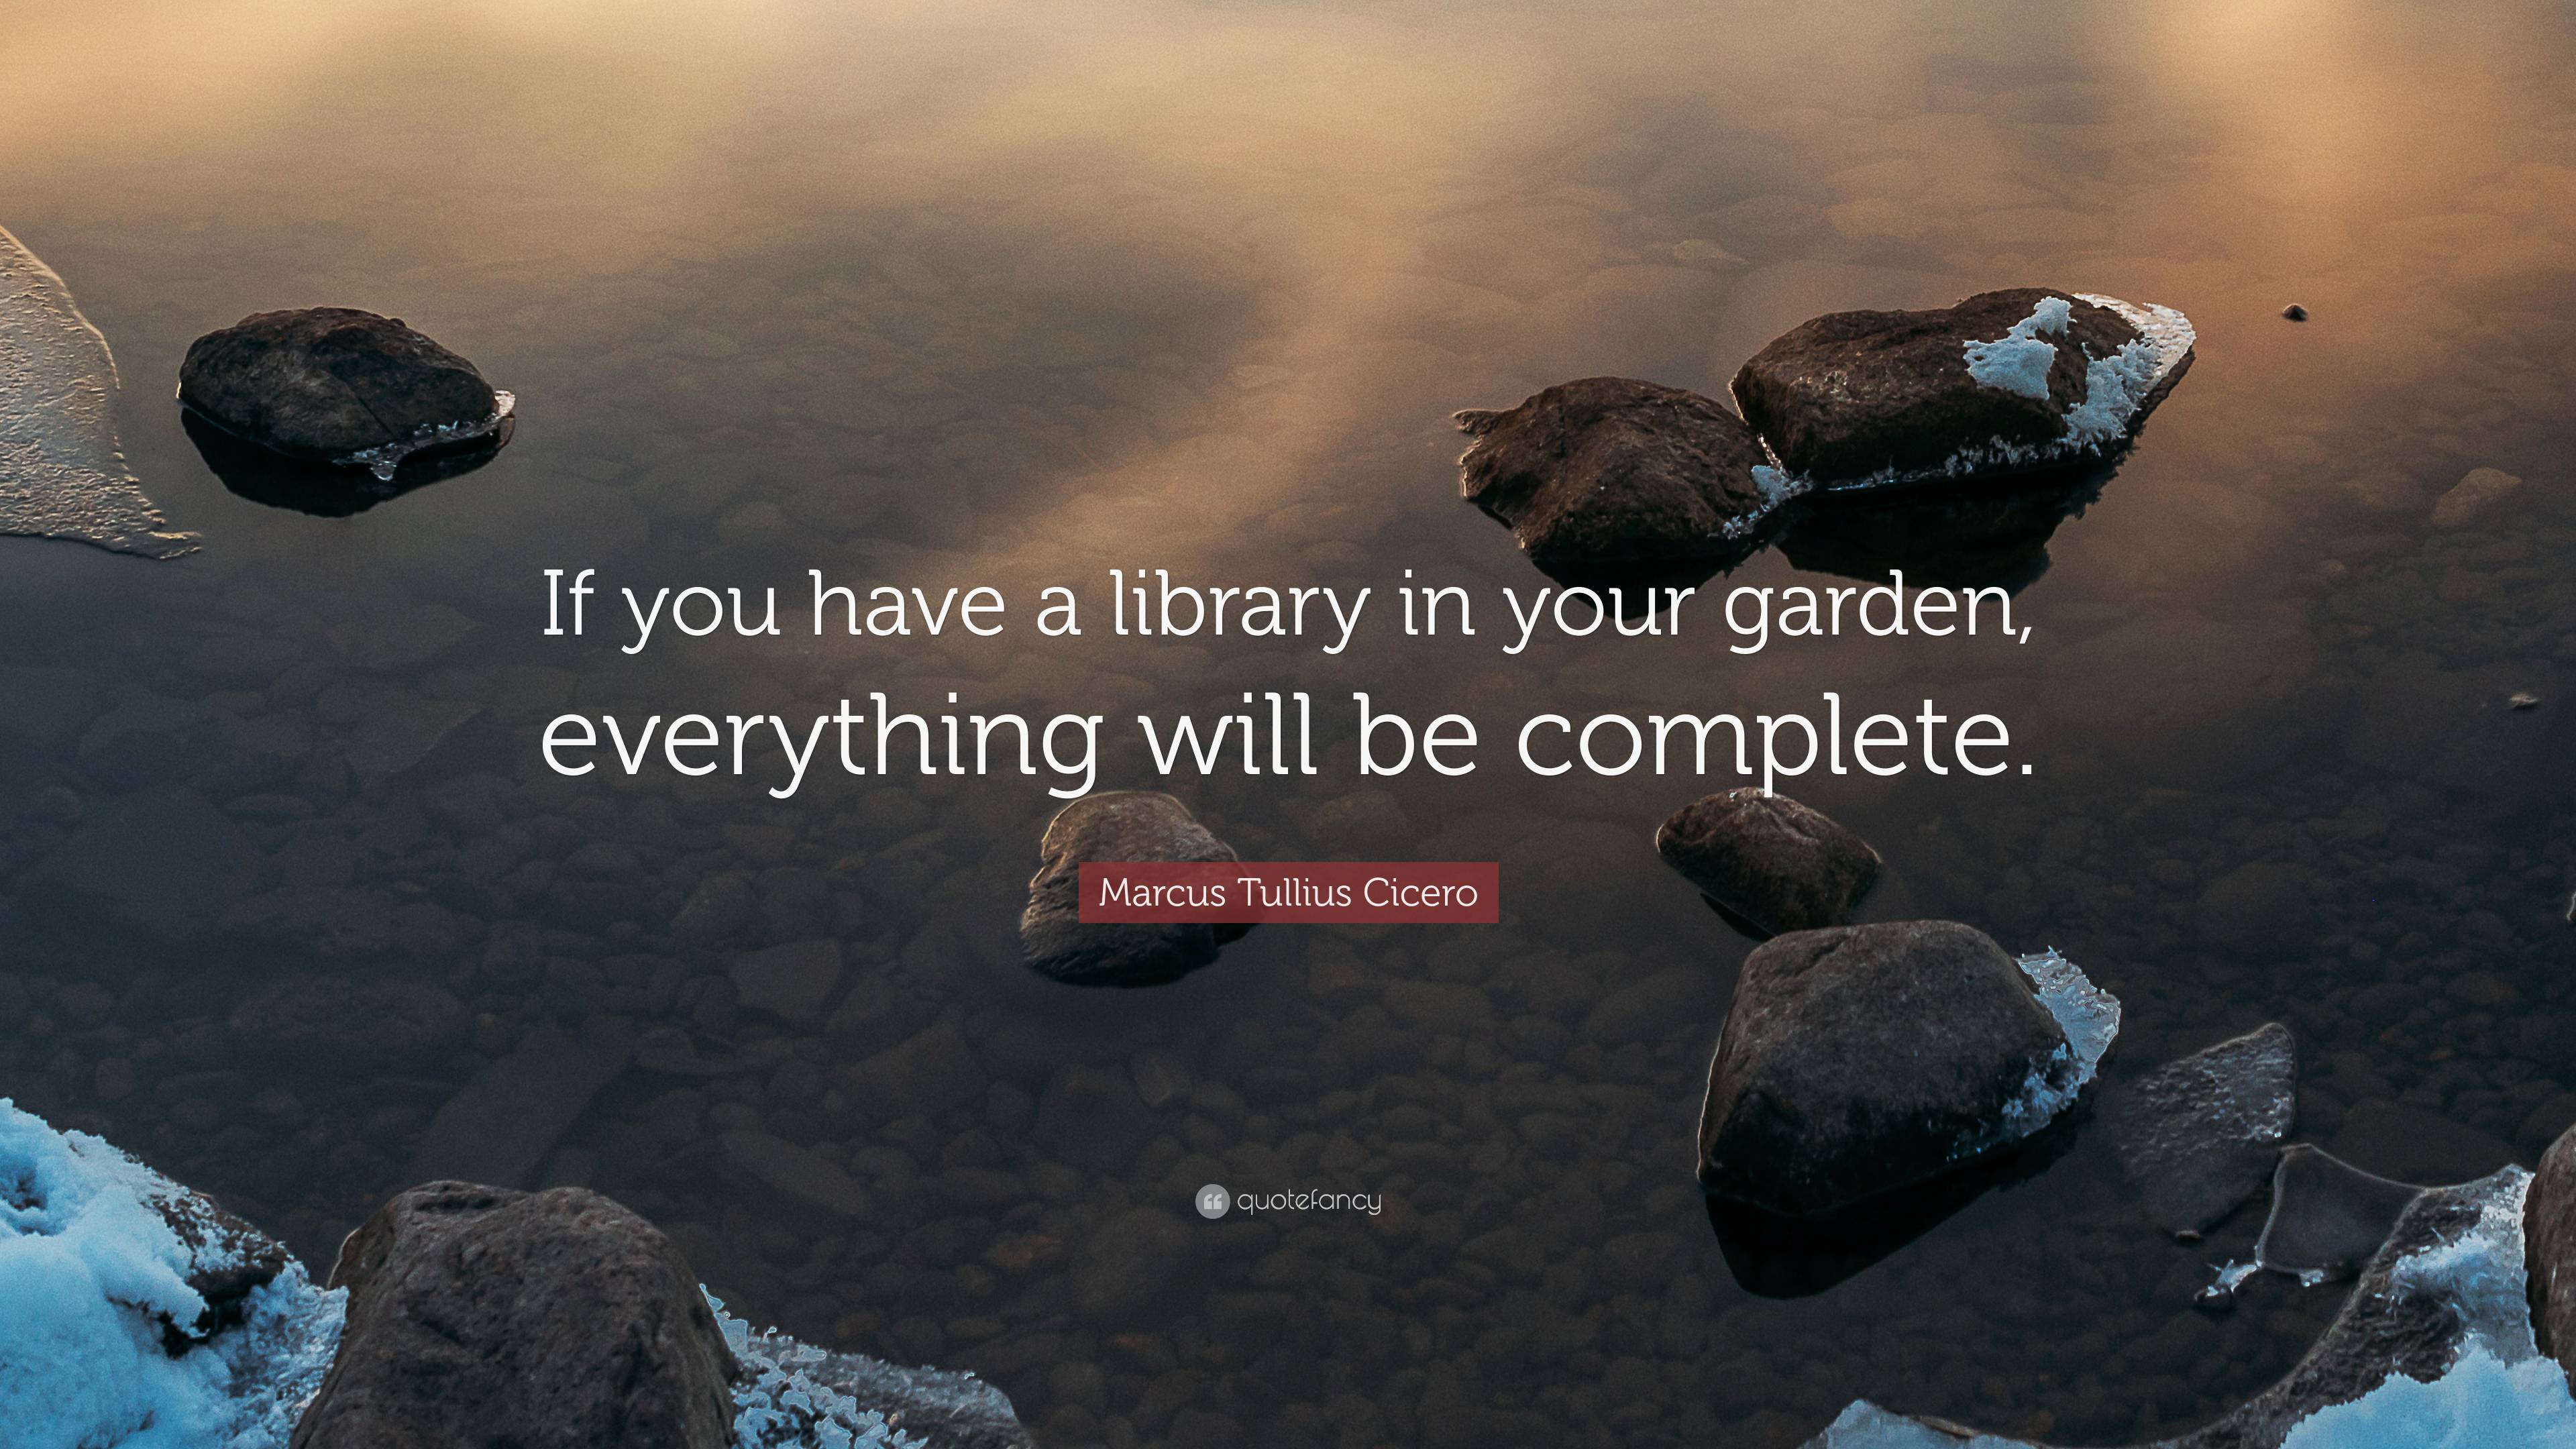 Marcus Tullius Cicero Quote “if You Have A Library In Your Garden Everything Will Be Complete”